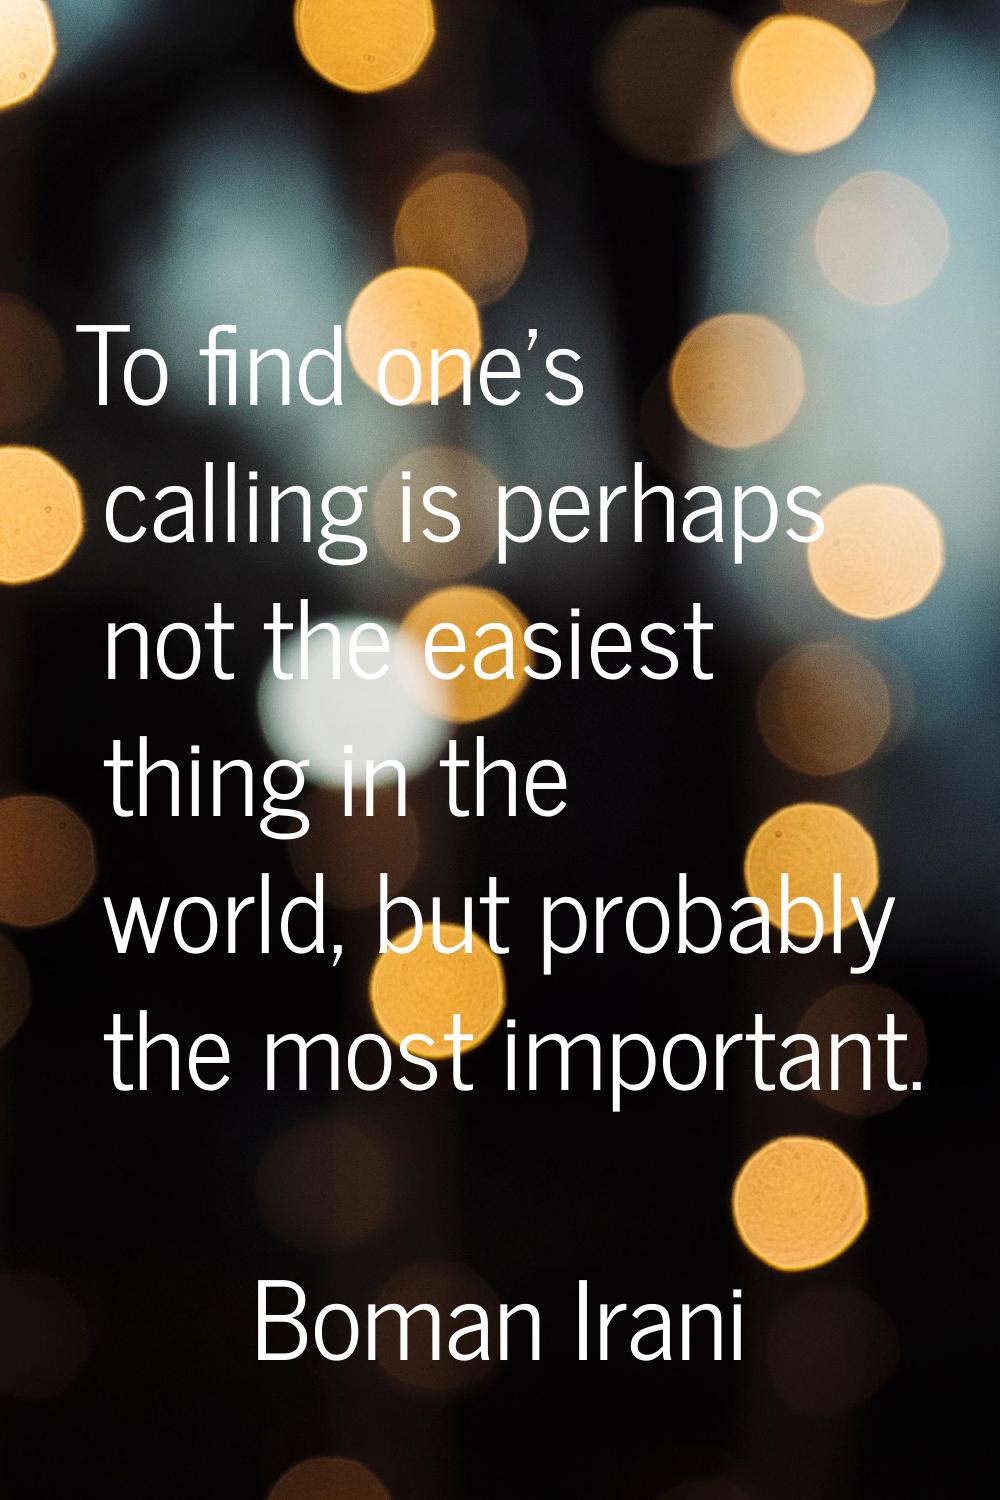 To find one's calling is perhaps not the easiest thing in the world, but probably the most importan